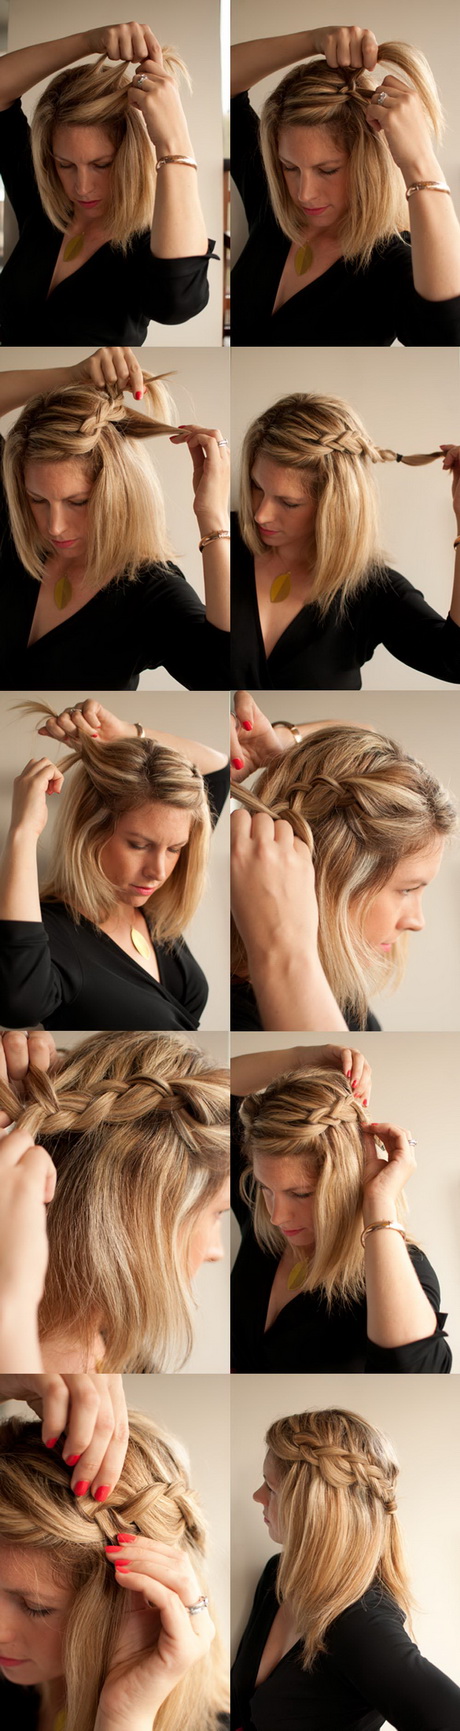 step-by-step-braided-hairstyles-with-pictures-38_17 Step by step braided hairstyles with pictures